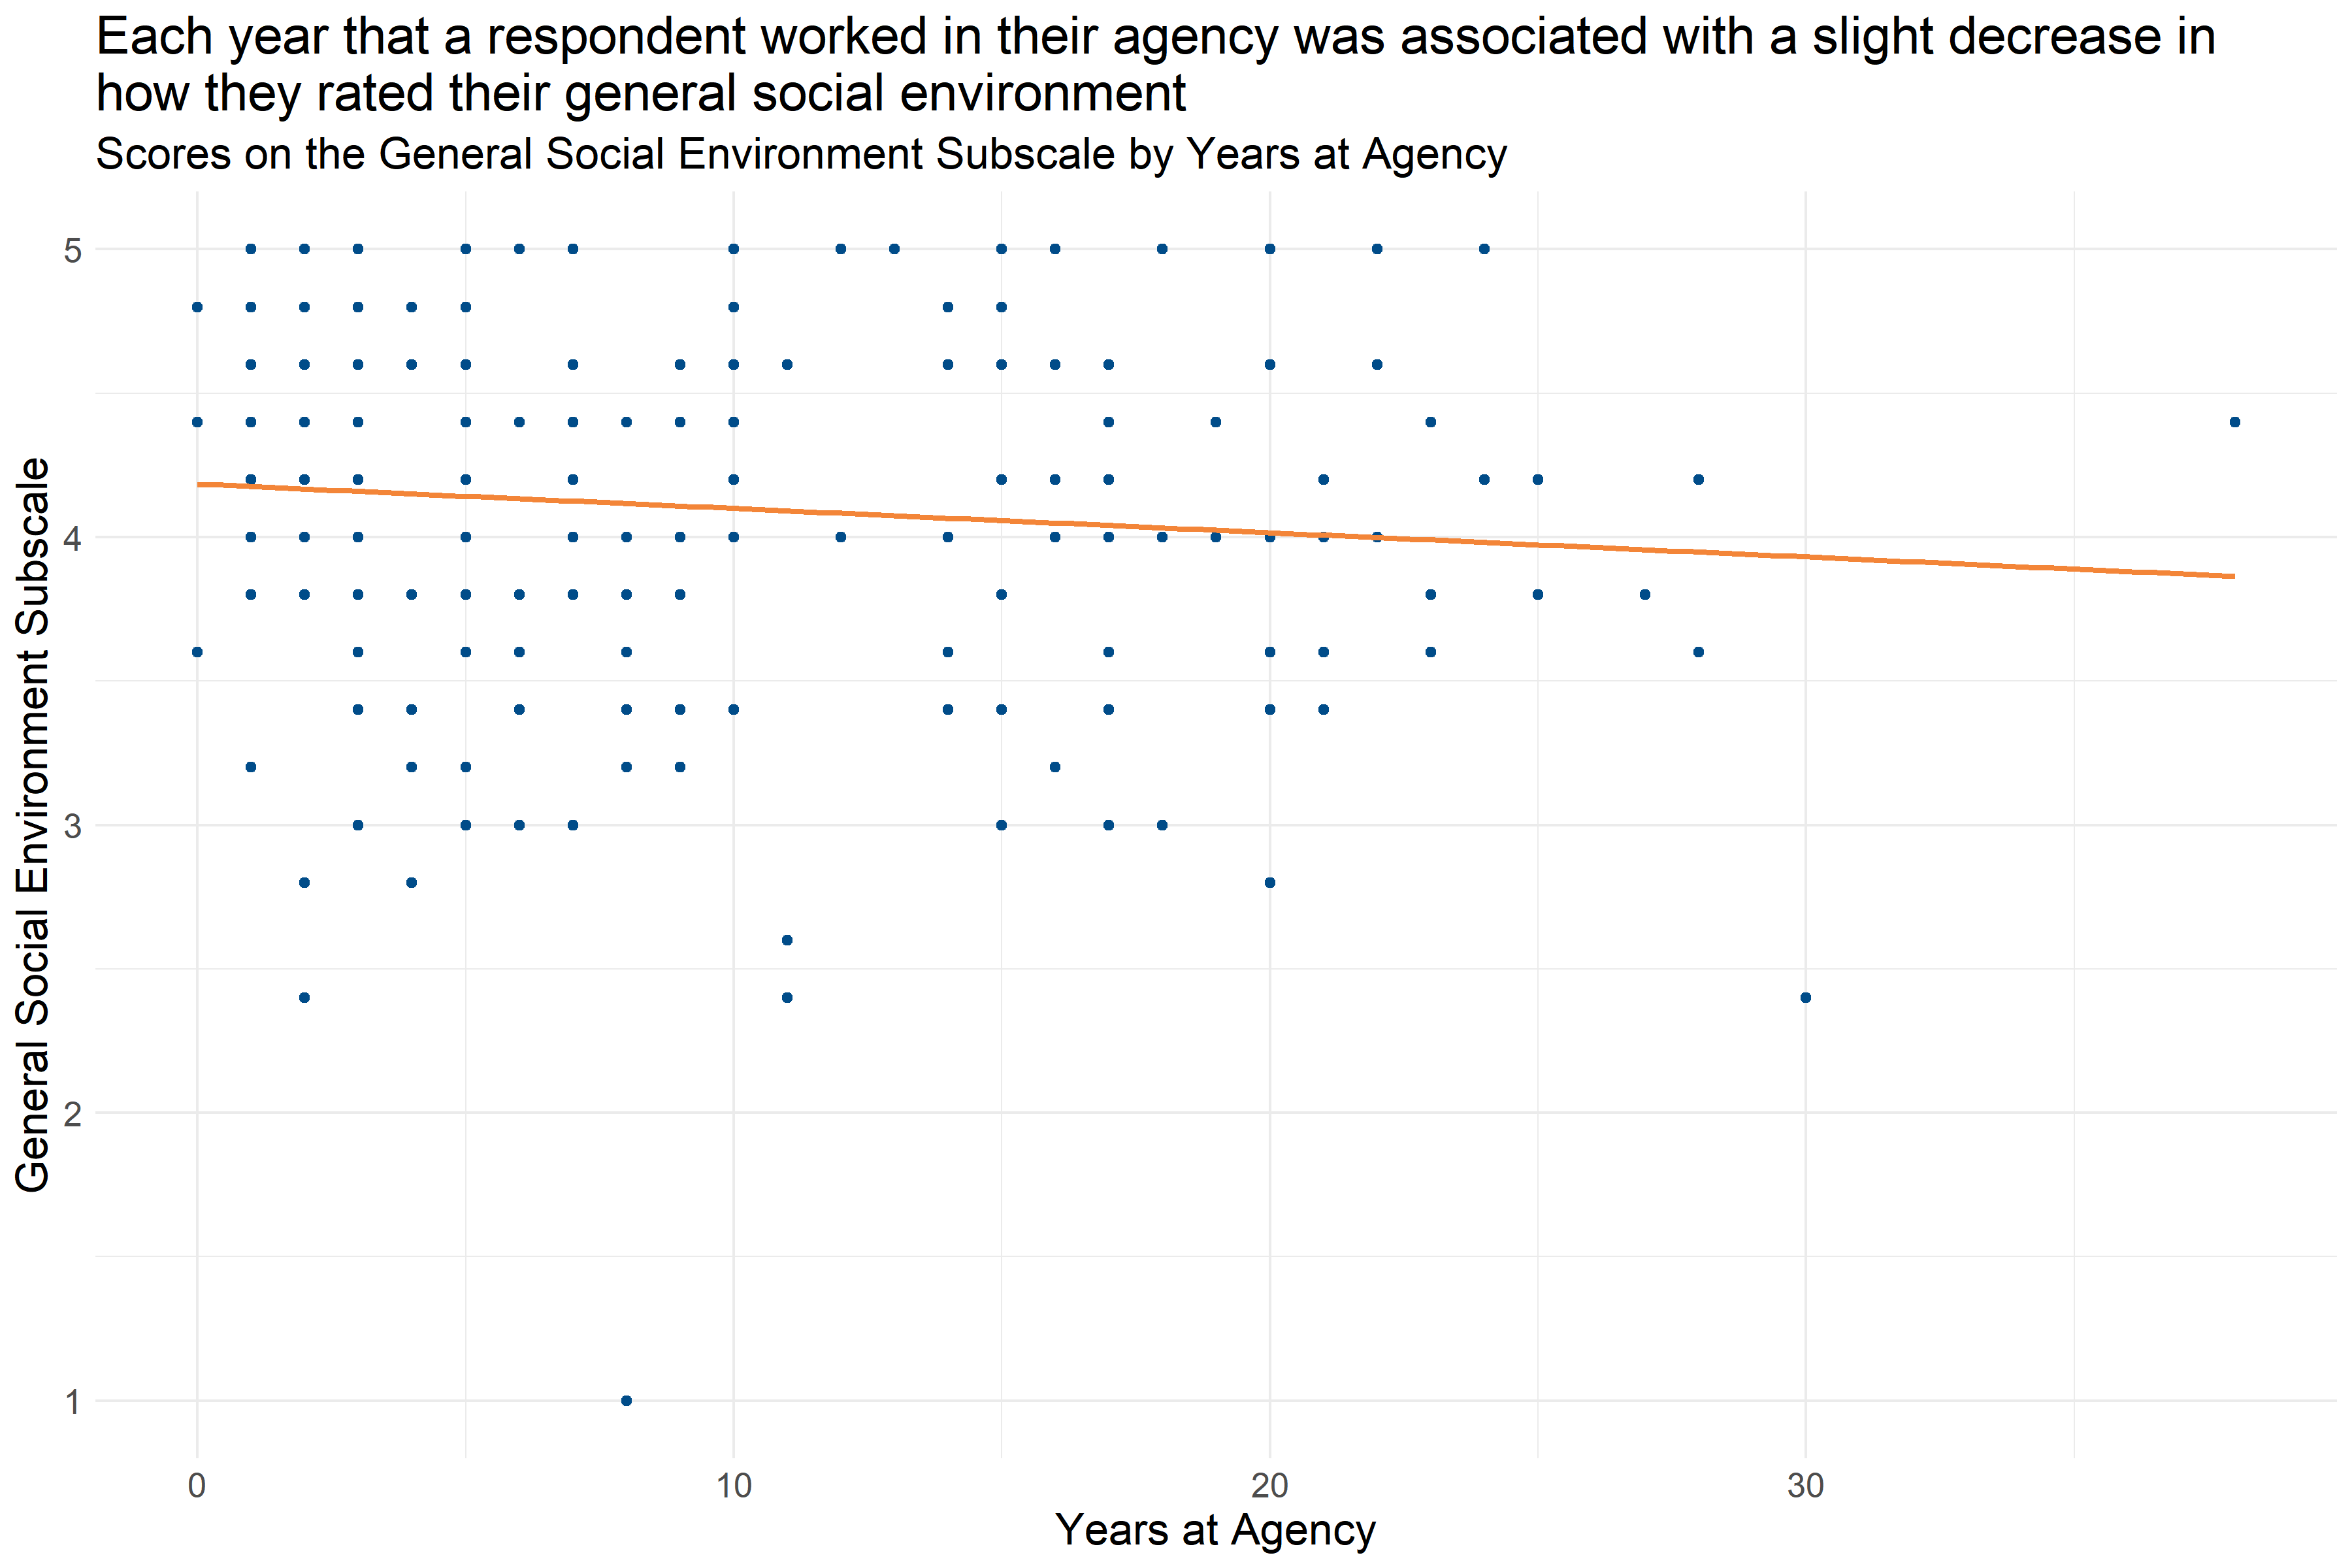 Scatter plot of Years at Agency and General Social Environment Subscale score